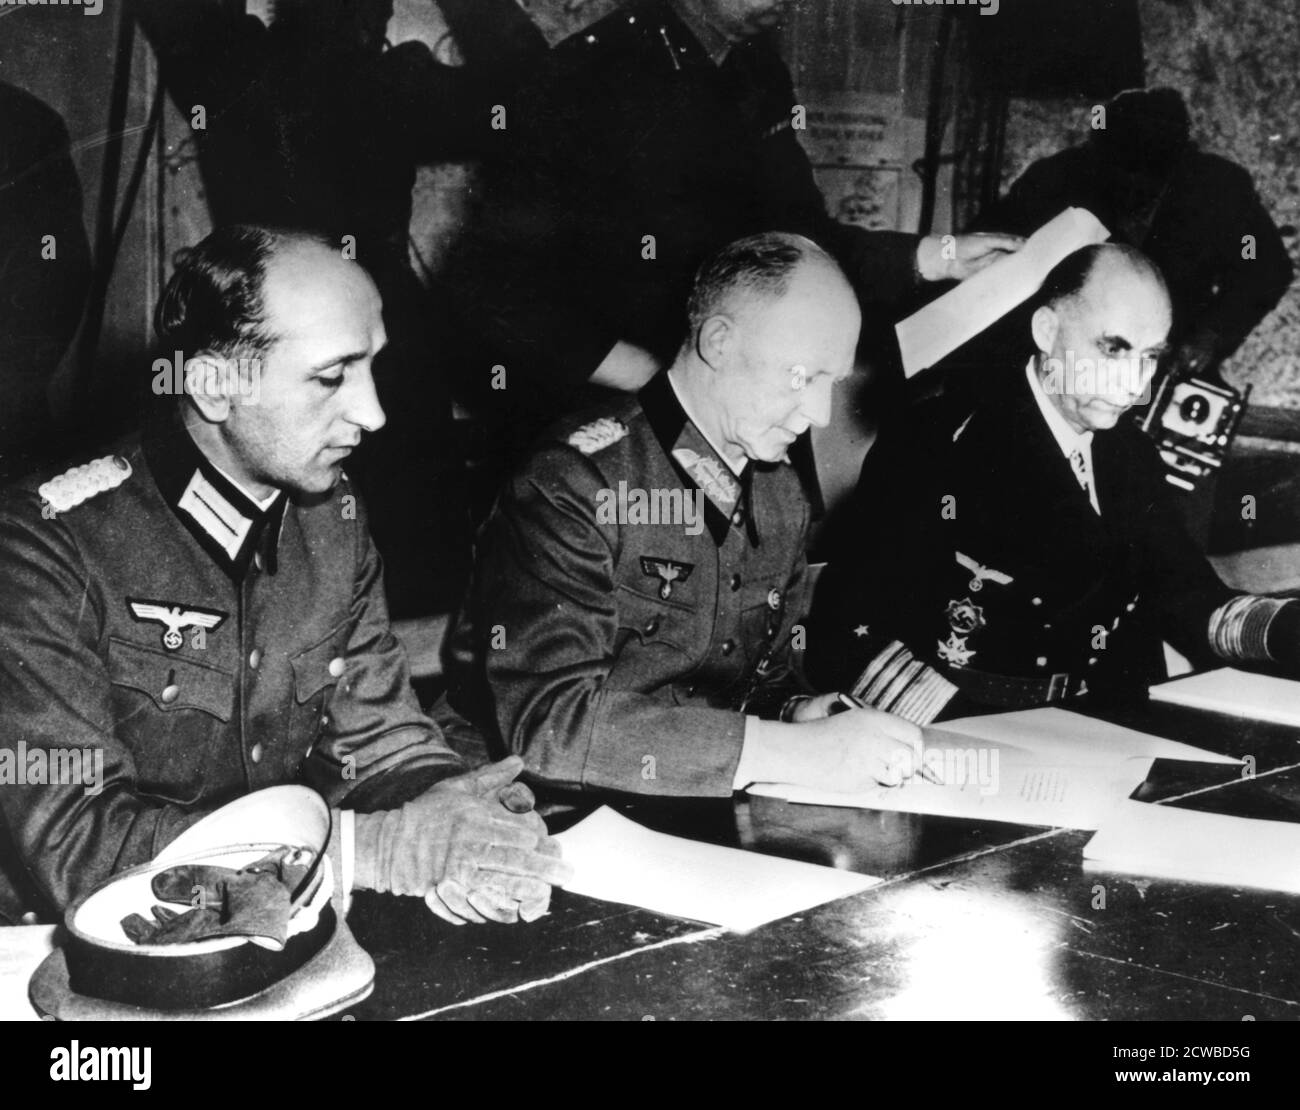 Surrender of Nazi Germany, Reims, France, 7 May 1945. General Alfred Jodl, the German Chief of Staff signing the document confirming Germany's unconditional surrender to the Allies. By his side are his aide Major Wilhelm Oxenius (left) and Admiral Hans Georg von Friedeburg, commander of the German Navy. The photographer is unknown. Stock Photo